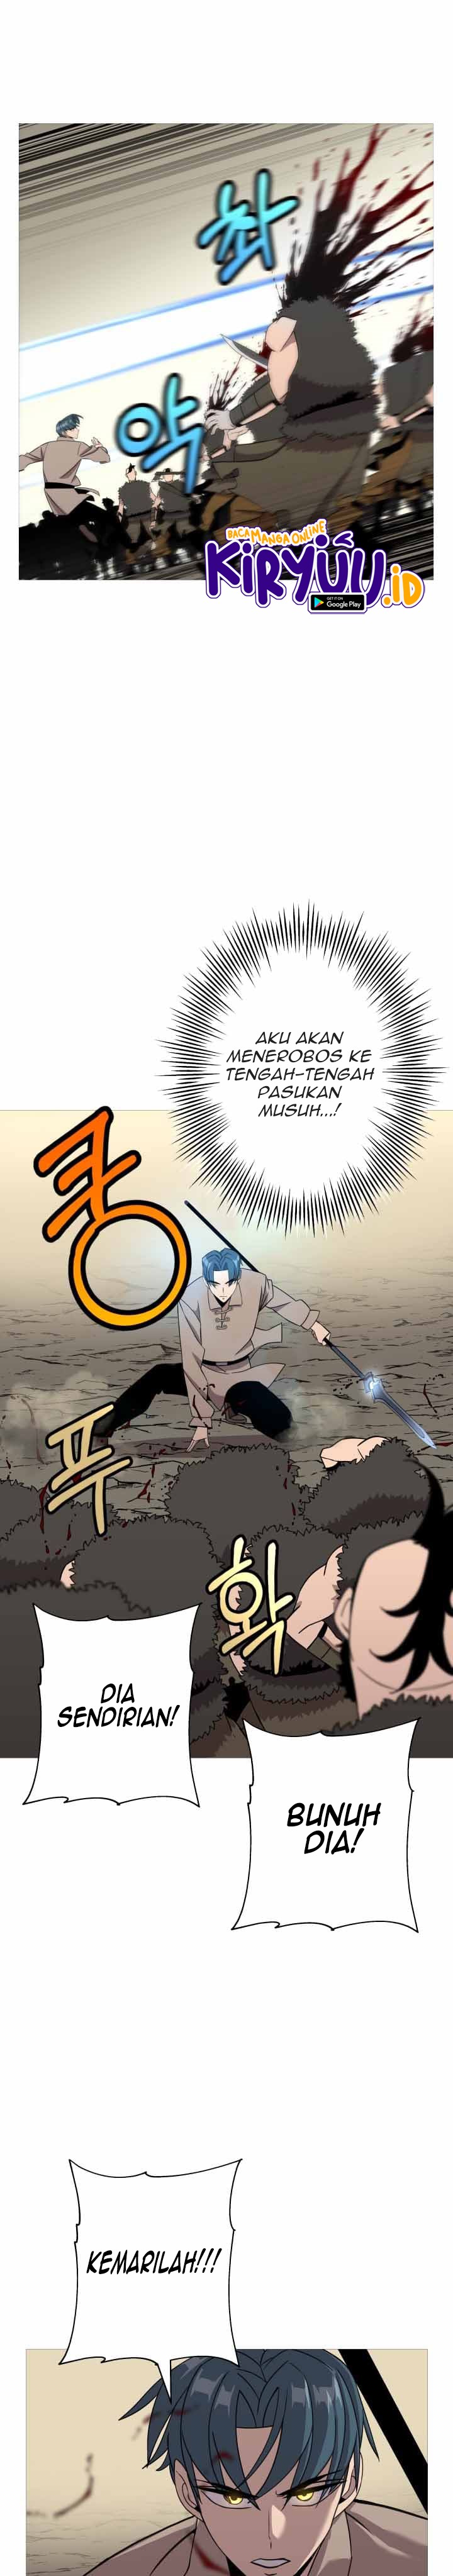 Dilarang COPAS - situs resmi www.mangacanblog.com - Komik the story of a low rank soldier becoming a monarch 069 - chapter 69 70 Indonesia the story of a low rank soldier becoming a monarch 069 - chapter 69 Terbaru 23|Baca Manga Komik Indonesia|Mangacan